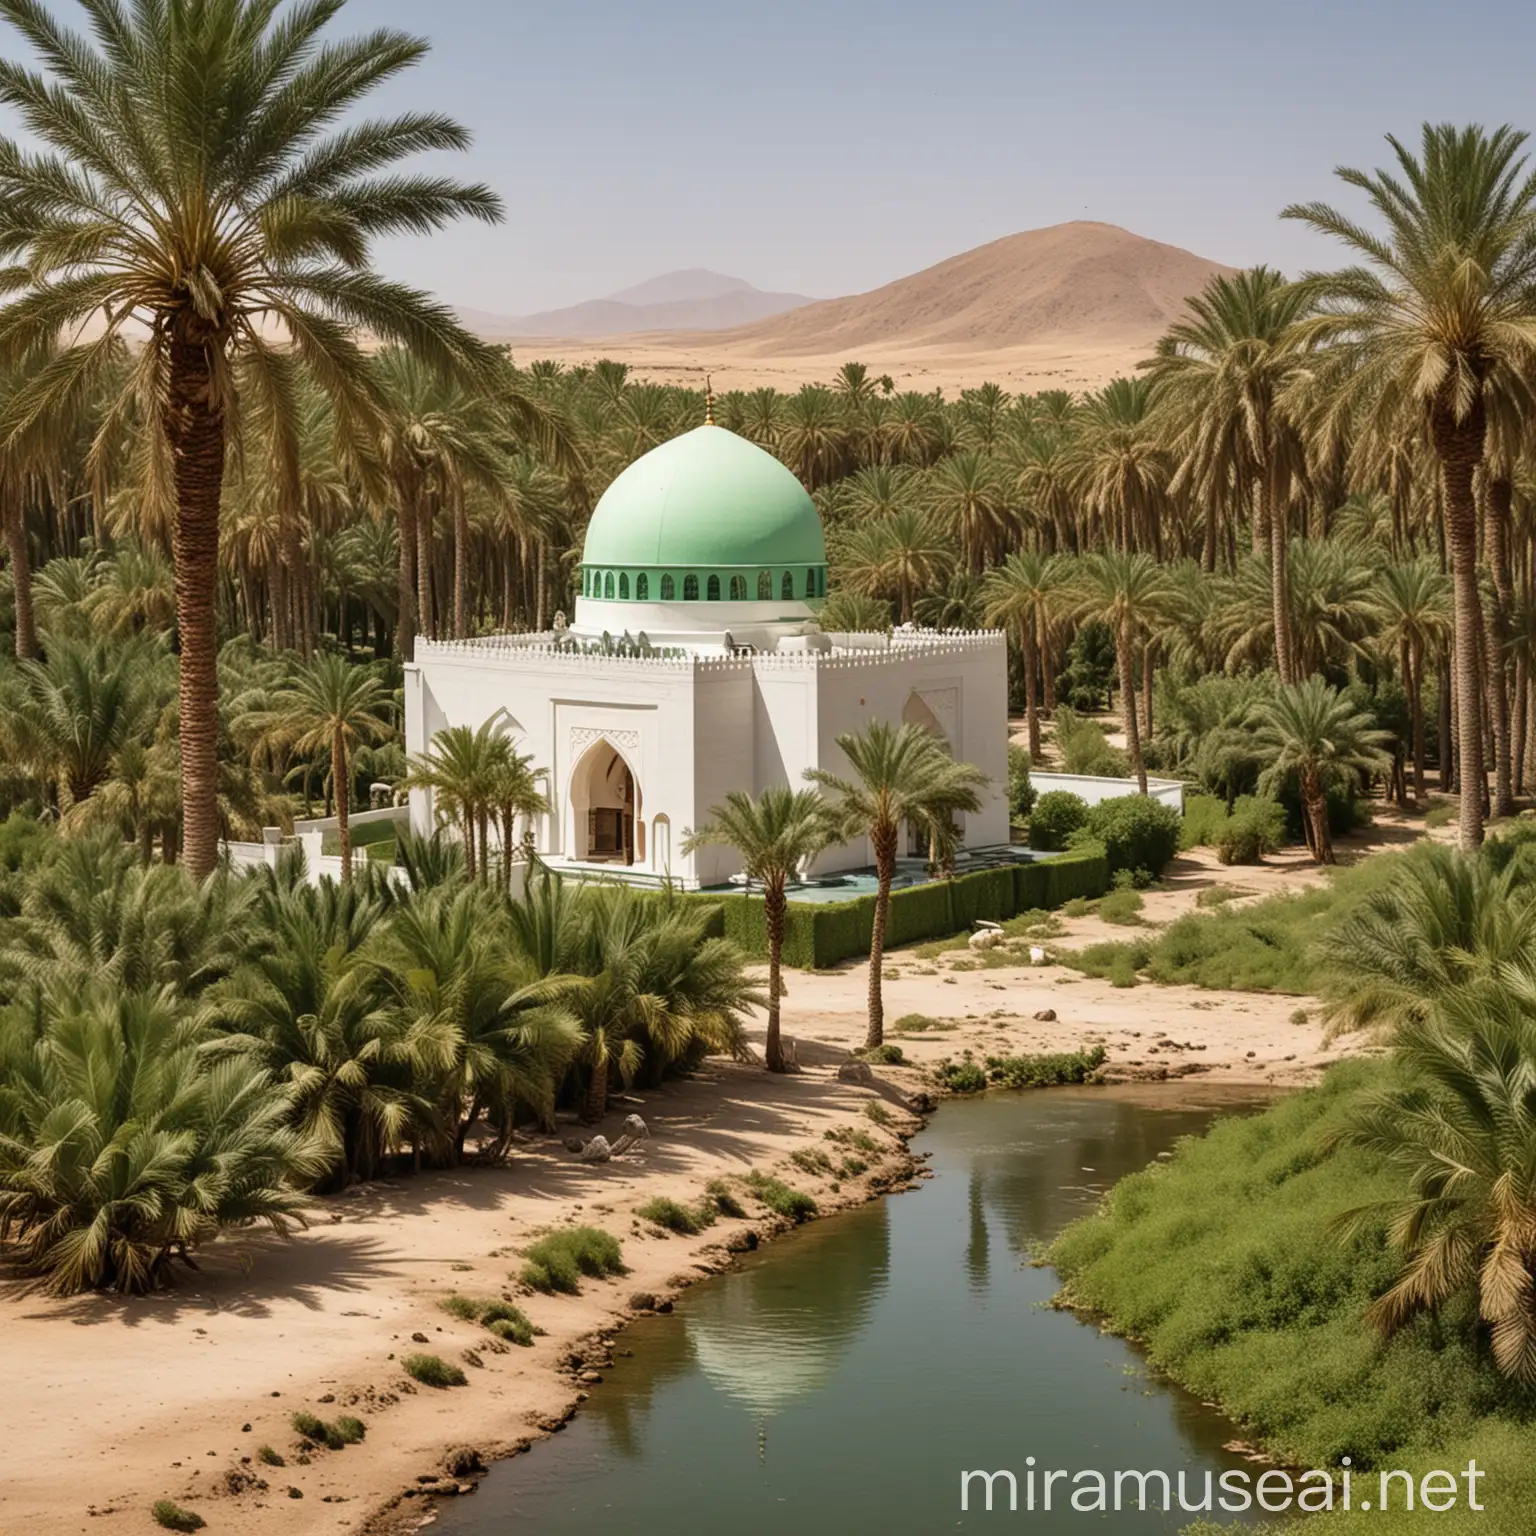 Green Domed Mosque in Desert Oasis with Palm Trees and River